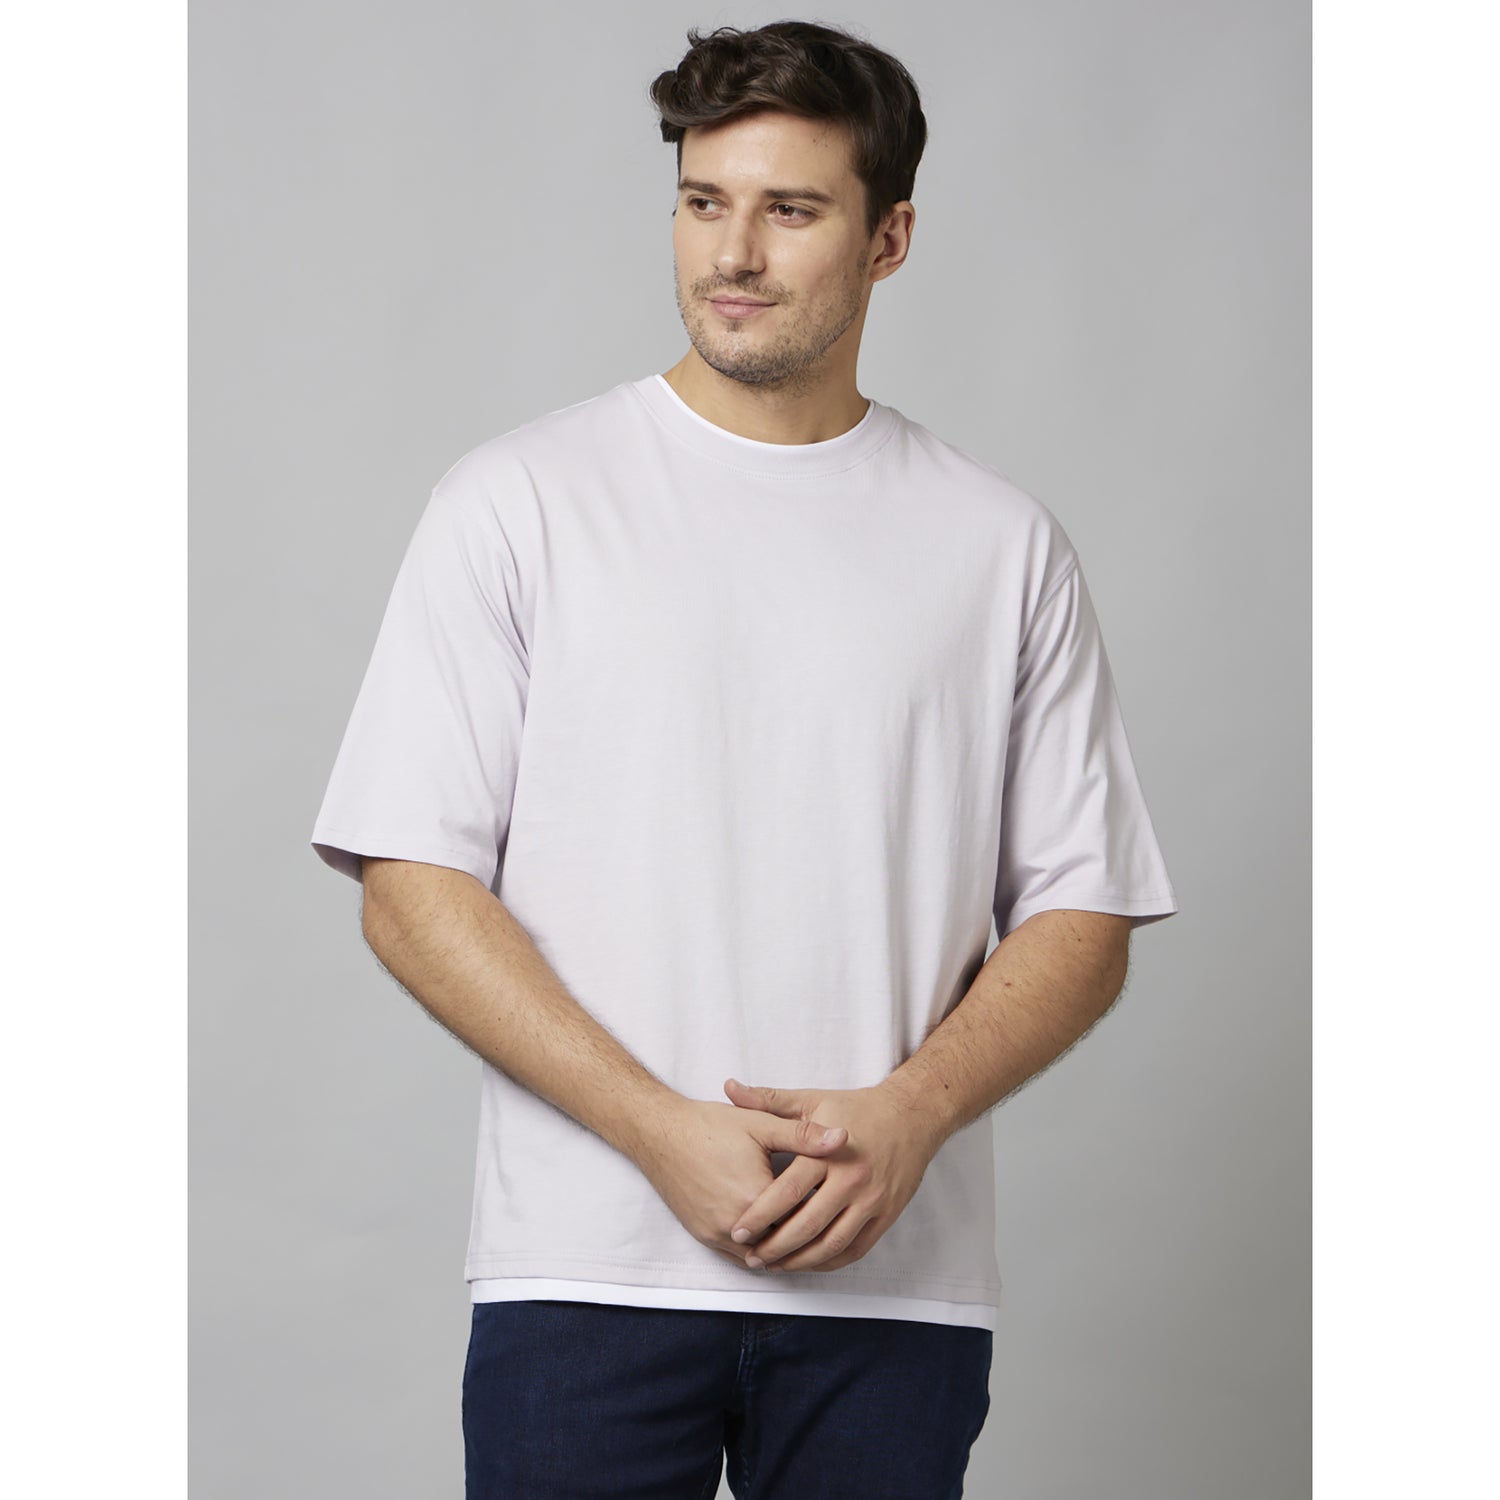 Violet Solid Half Sleeve Cotton T-Shirts (FETWIN)